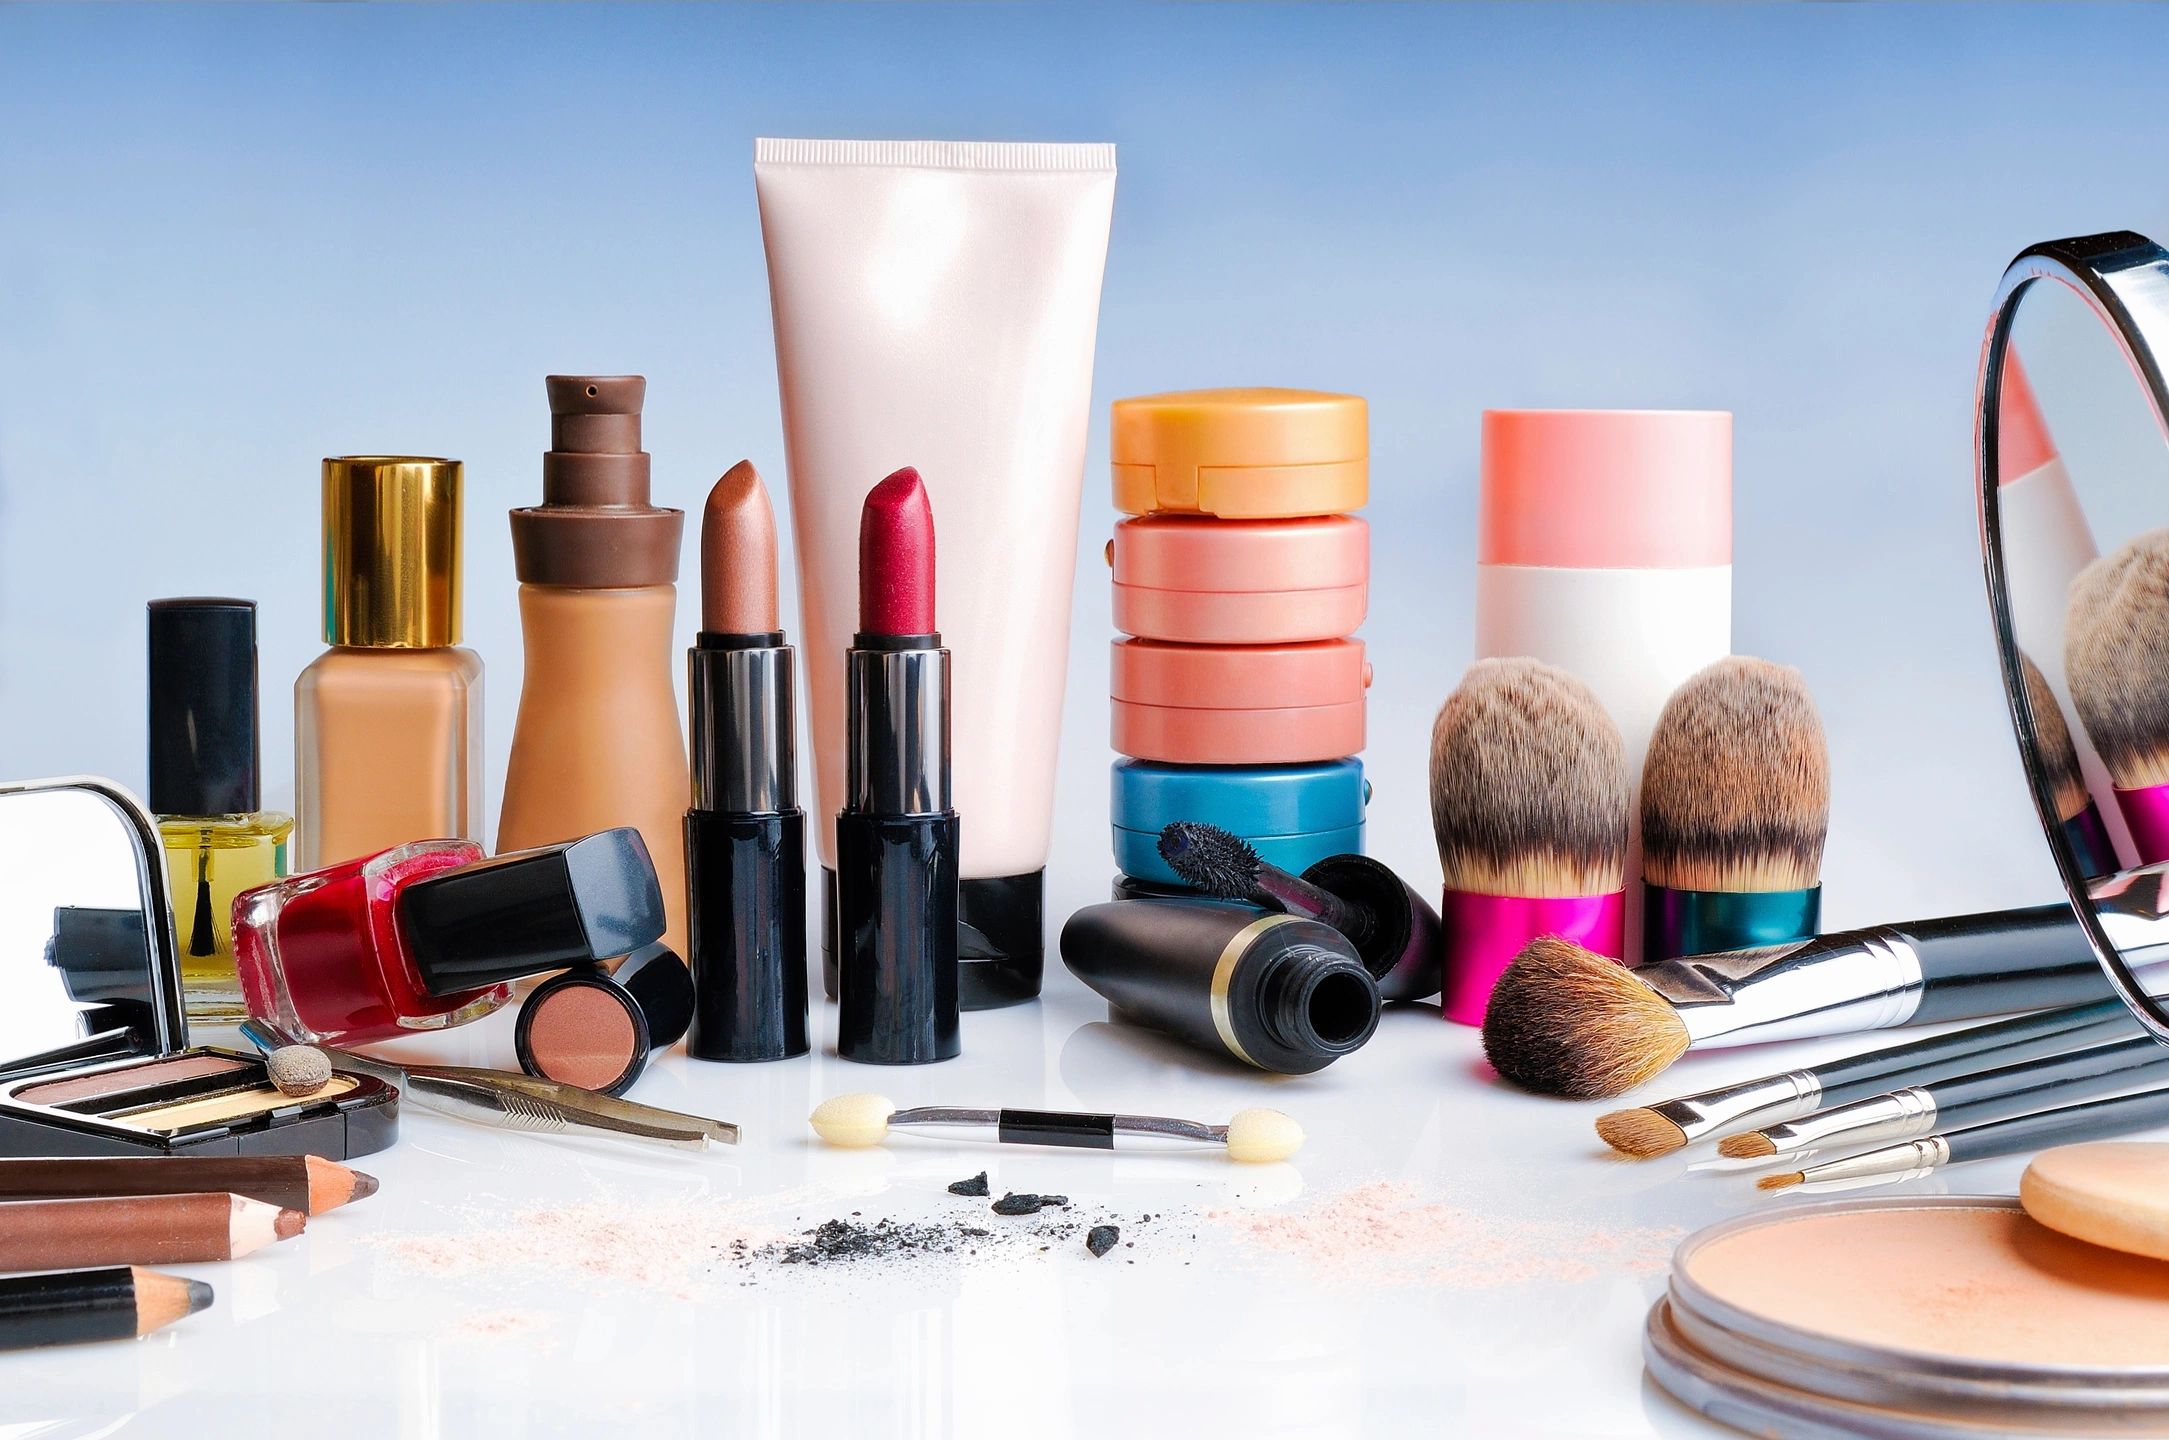 AVON PRODUCTS, MAKEUP, COSMETICS, AND MUCH MORE.
BEAUTY ON A BUDGET